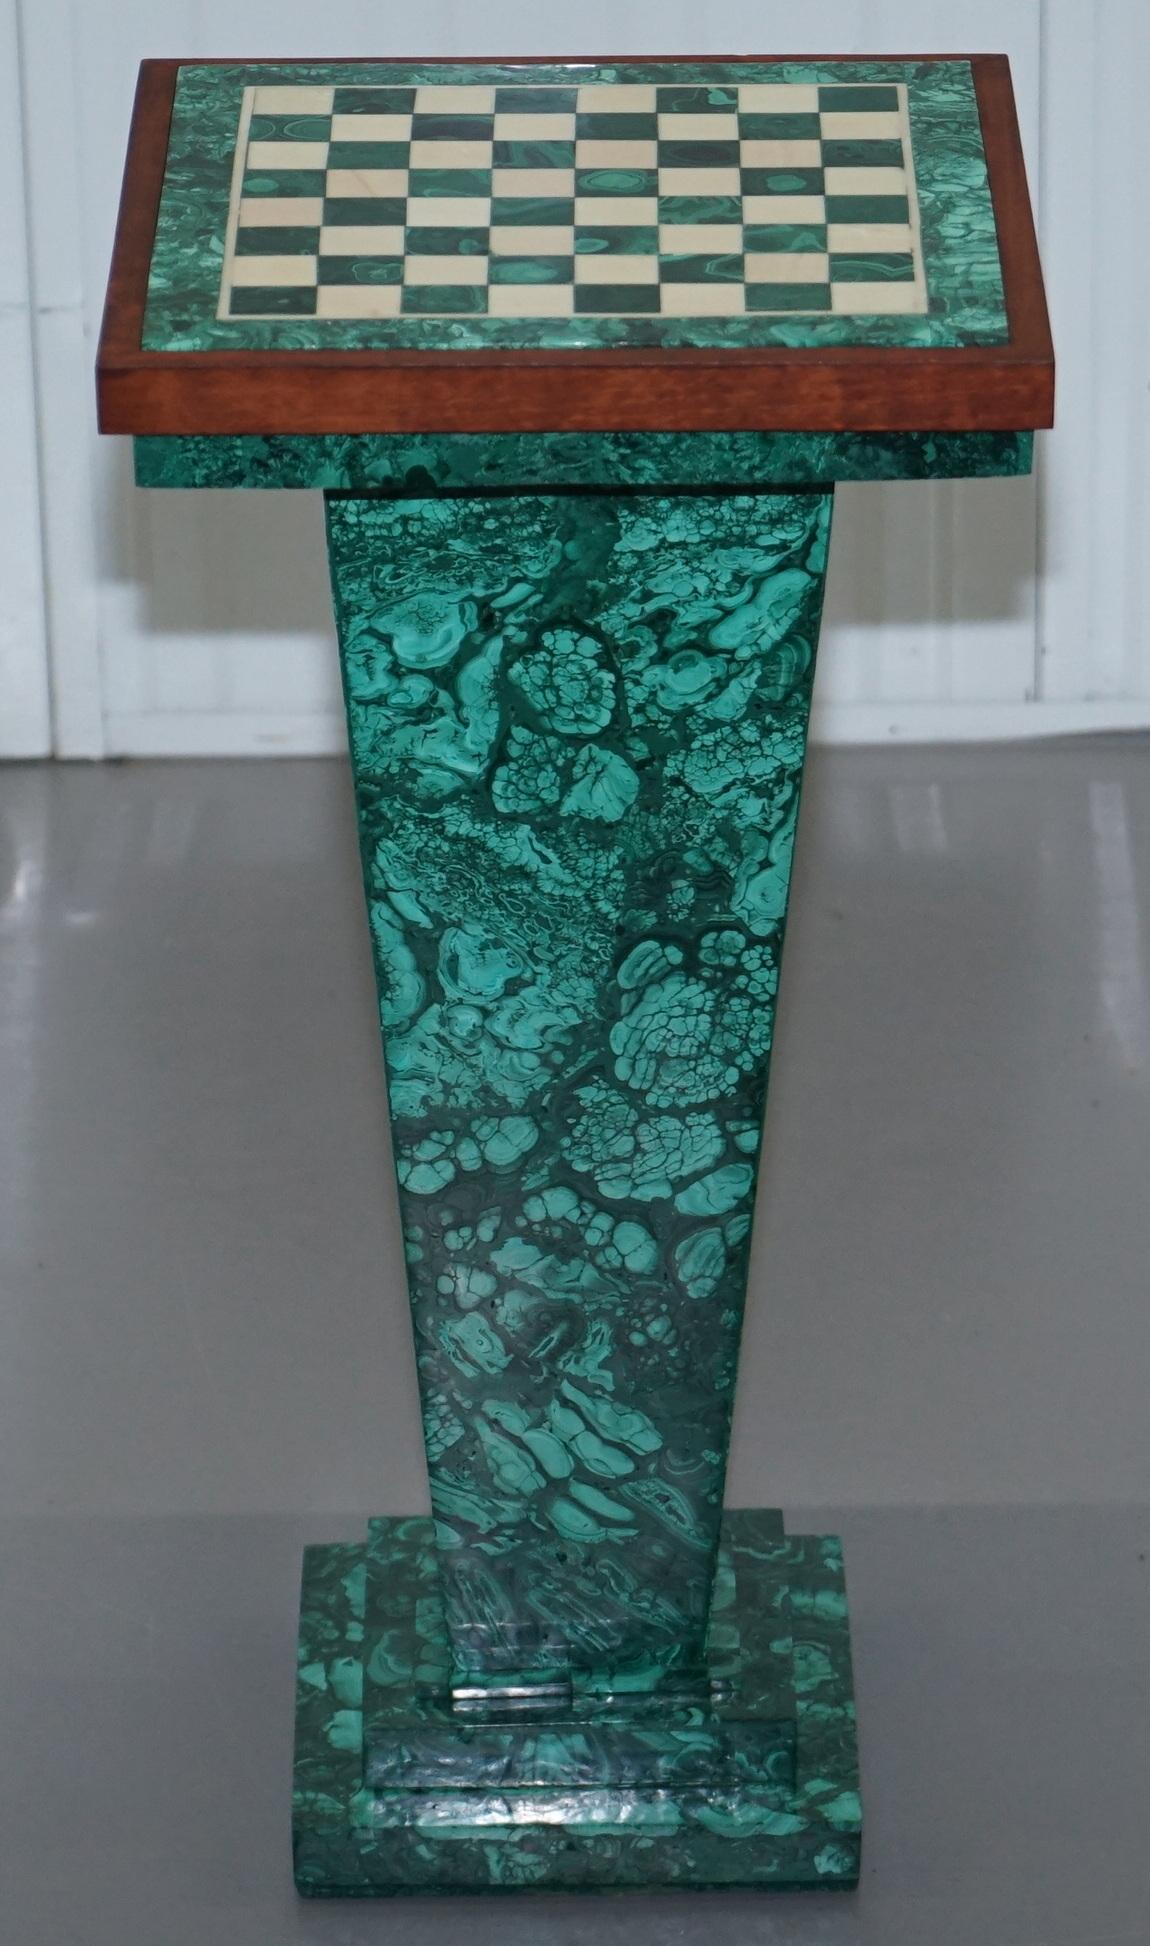 We are delighted to this stunning and very rare Malachite Pedestal Chess Games table with removeable board and internal storage after Alfredo Ravasco

A very and beautiful piece of art furniture, the Chess board top is removable so it can be used